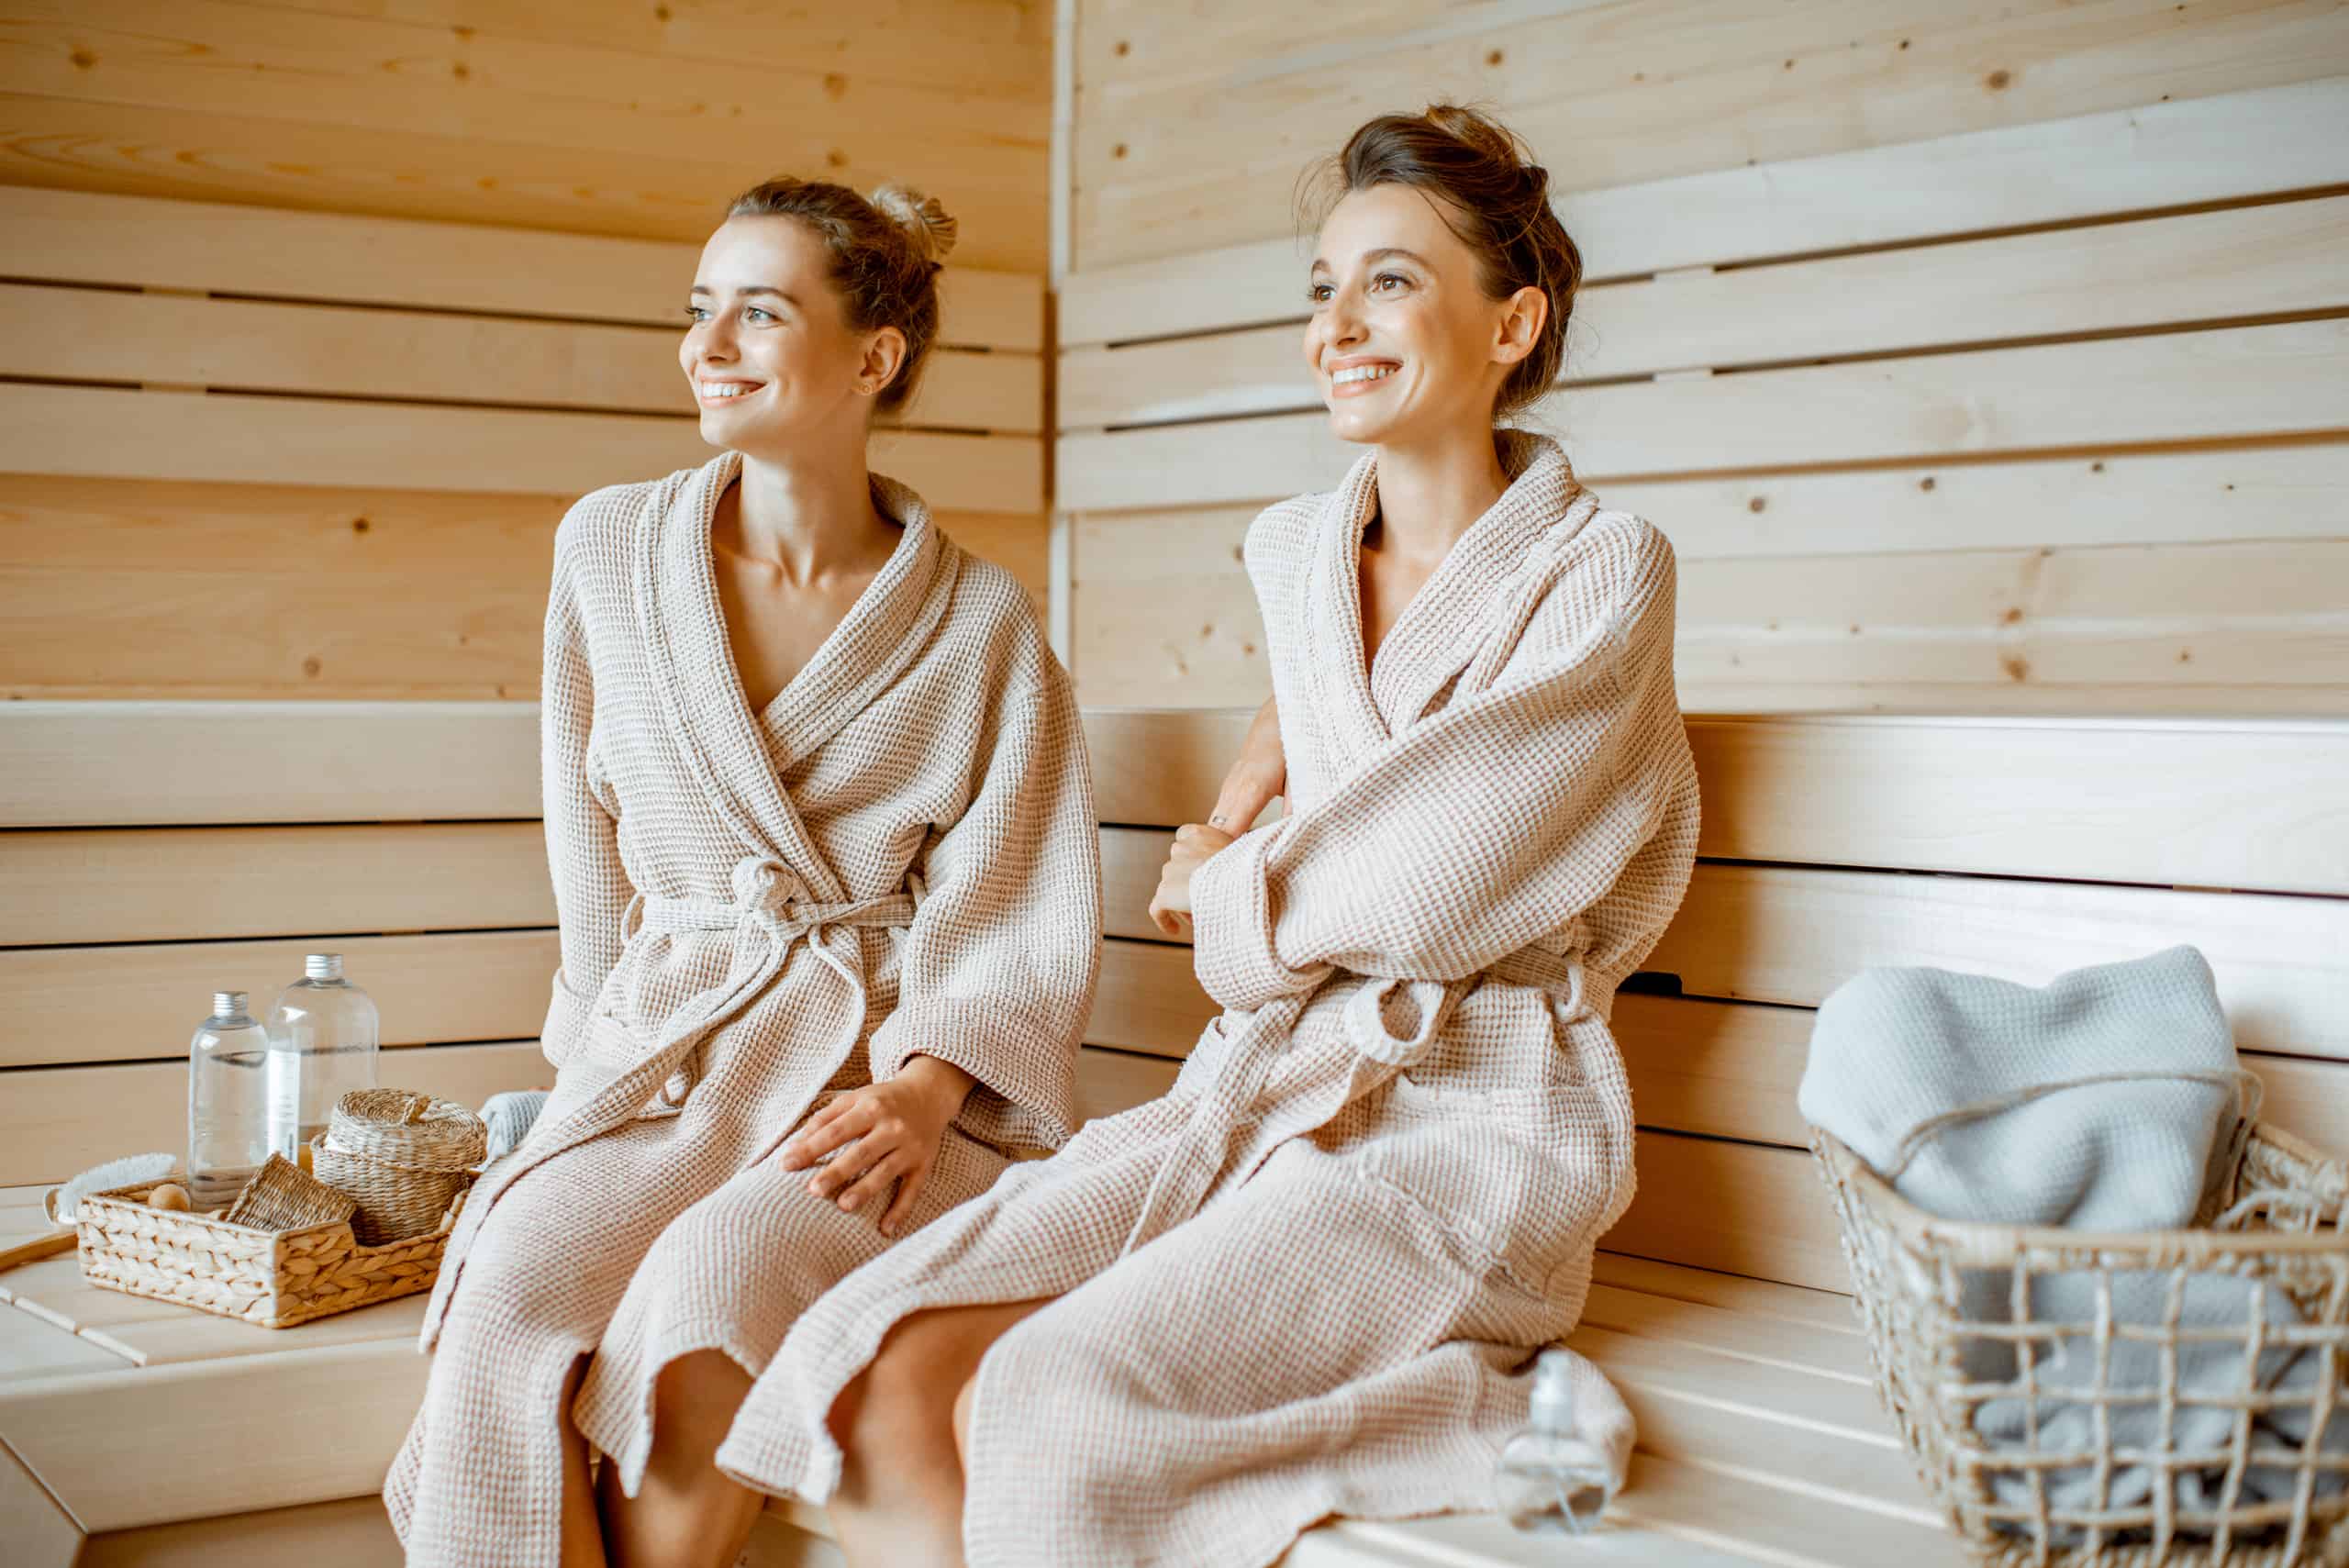 Saunas and Steam Rooms: A Relaxing Heat Therapy Option